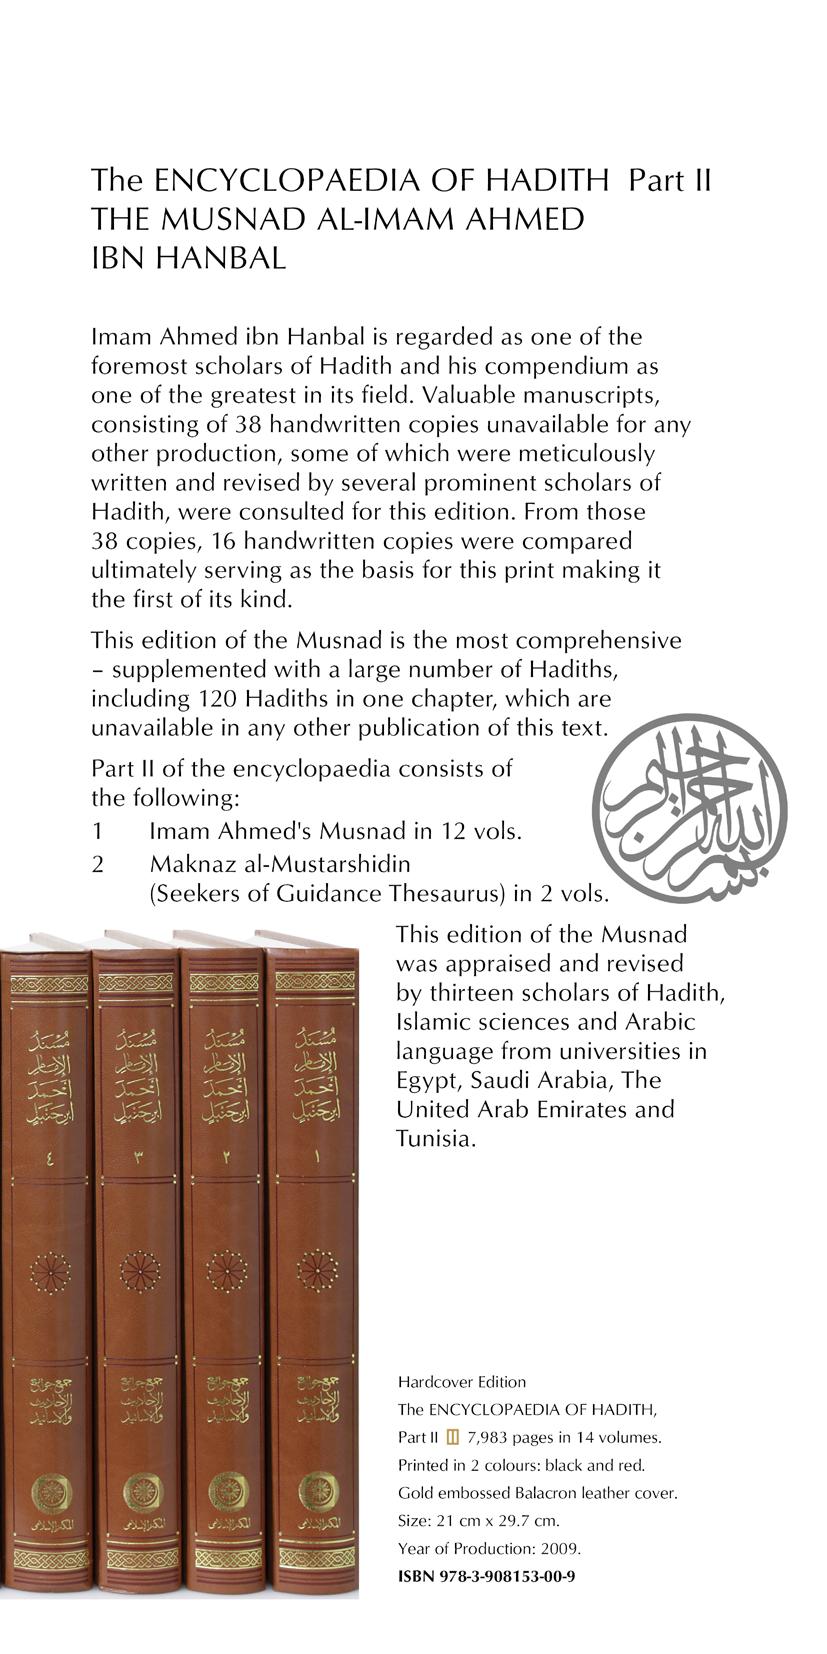 other publication of this text. Part II of the encyclopaedia consists of the following: 1 Imam Ahmed's Musnad in 12 vols.